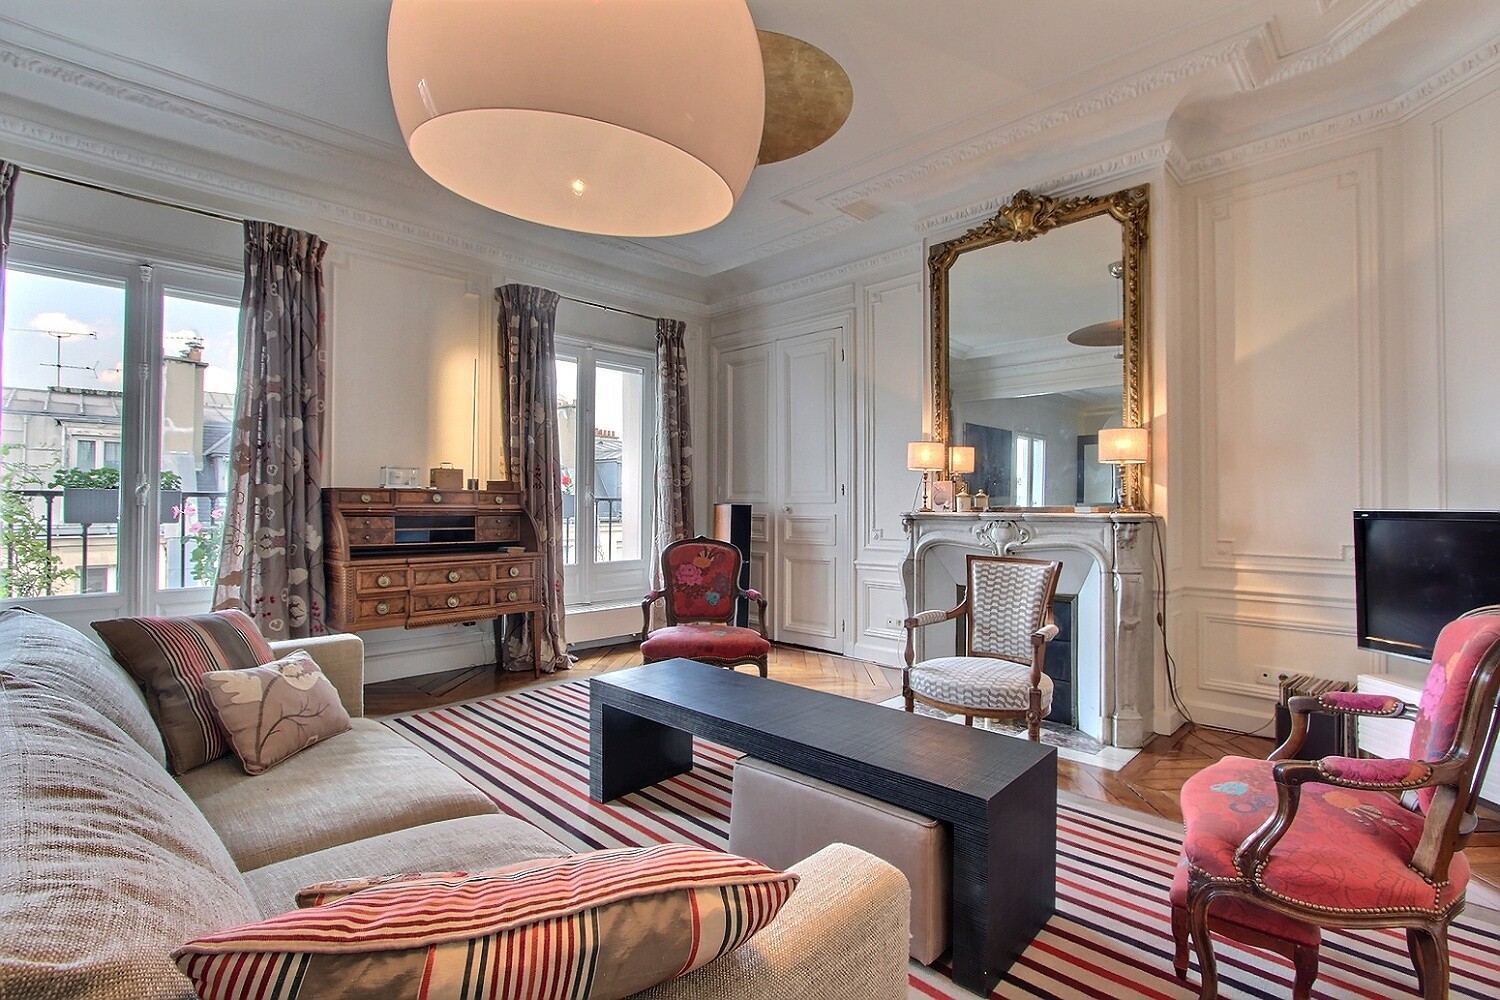 Rent a furnished 3 bedrooms apartment in Paris 6th - 150m2 - Saint ...